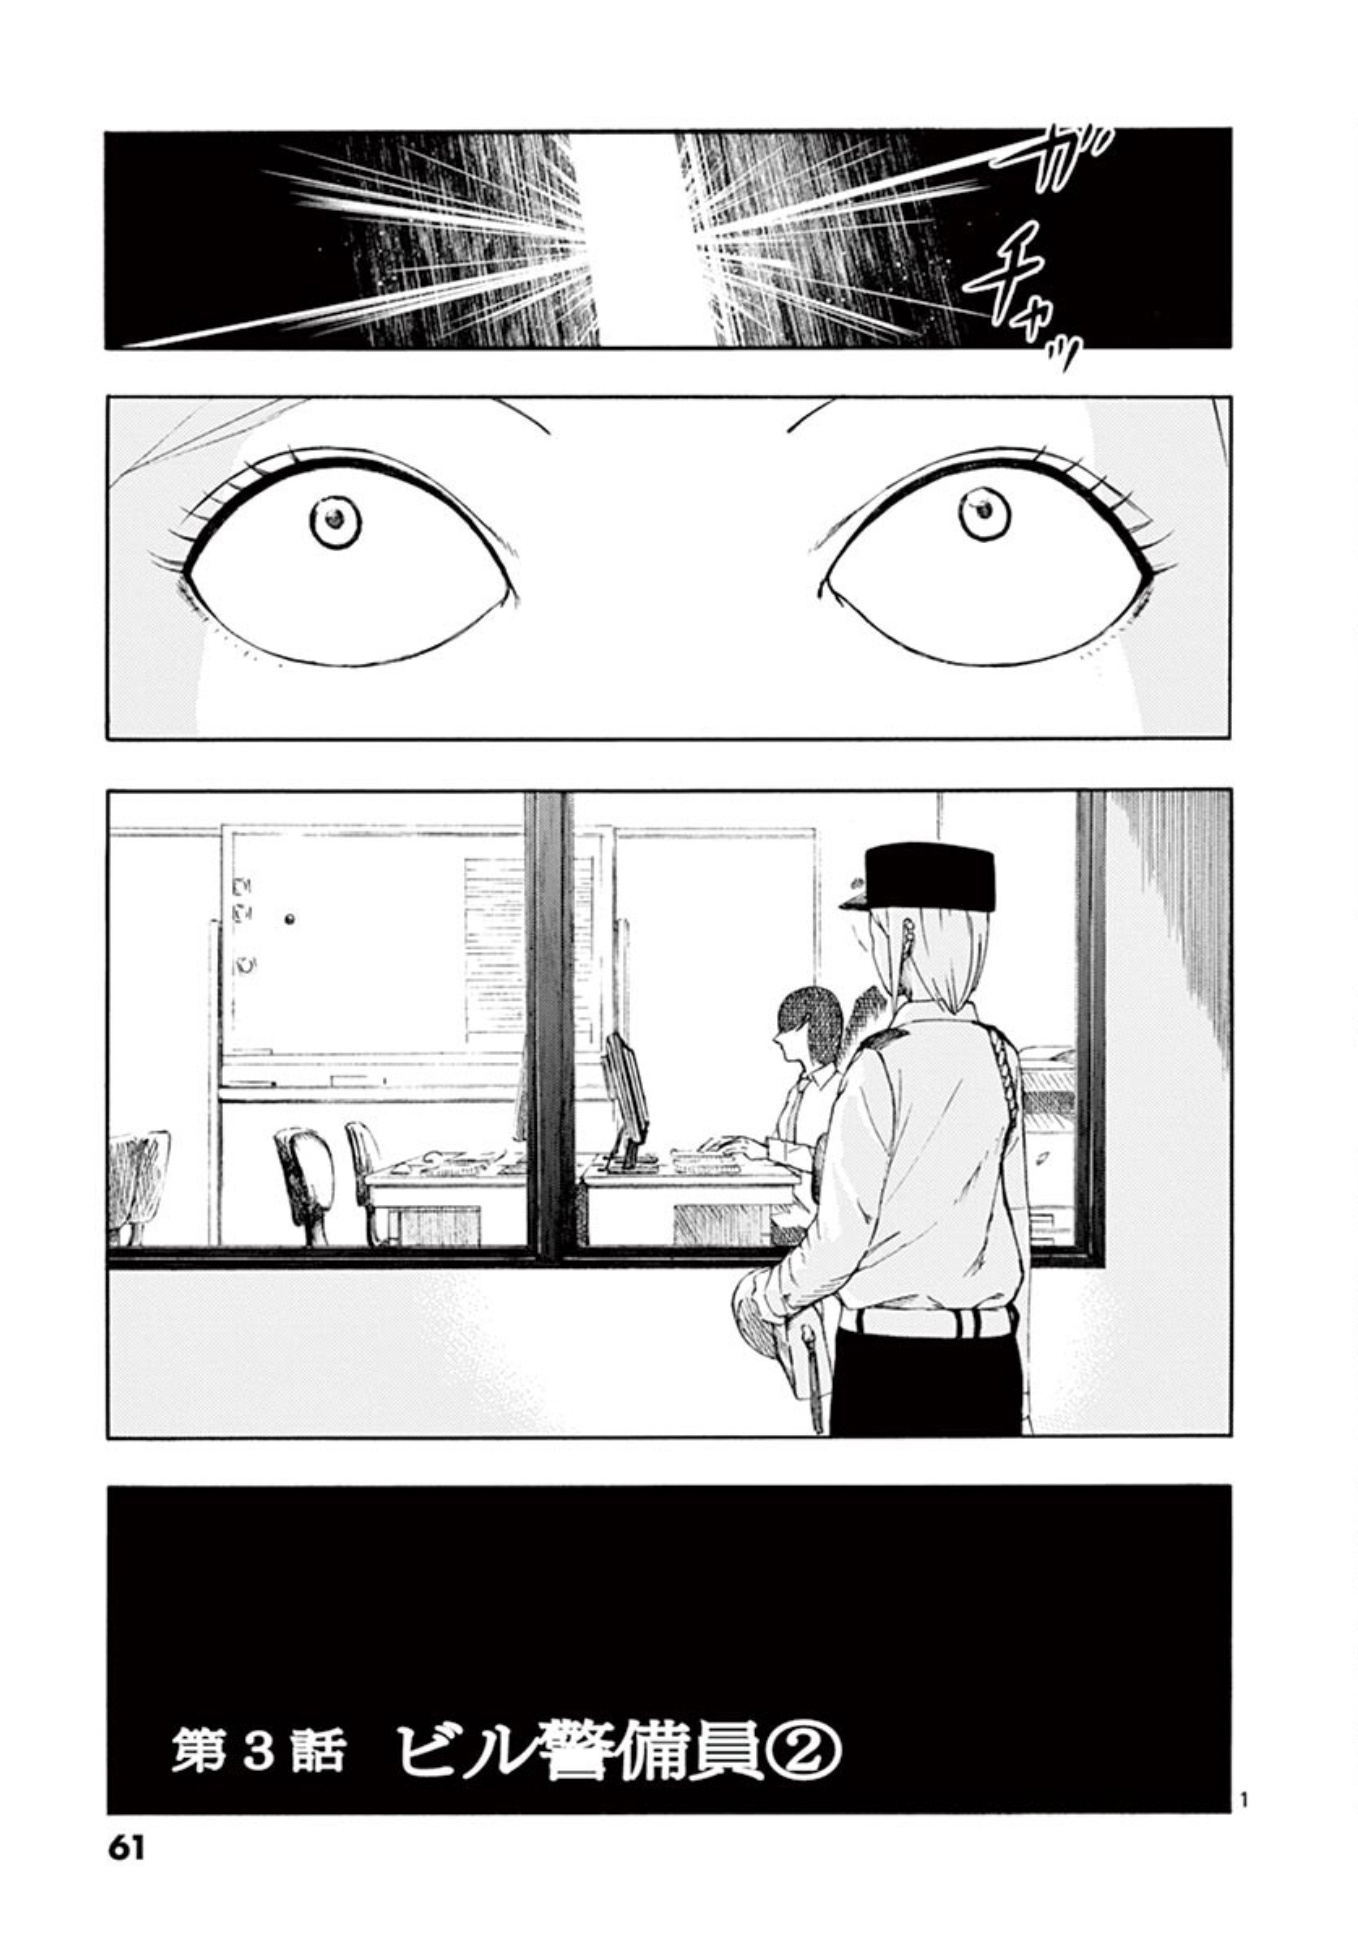 Ura Baito: Toubou Kinshi Vol.1 Chapter 3: Building Security Part 2 - Picture 1